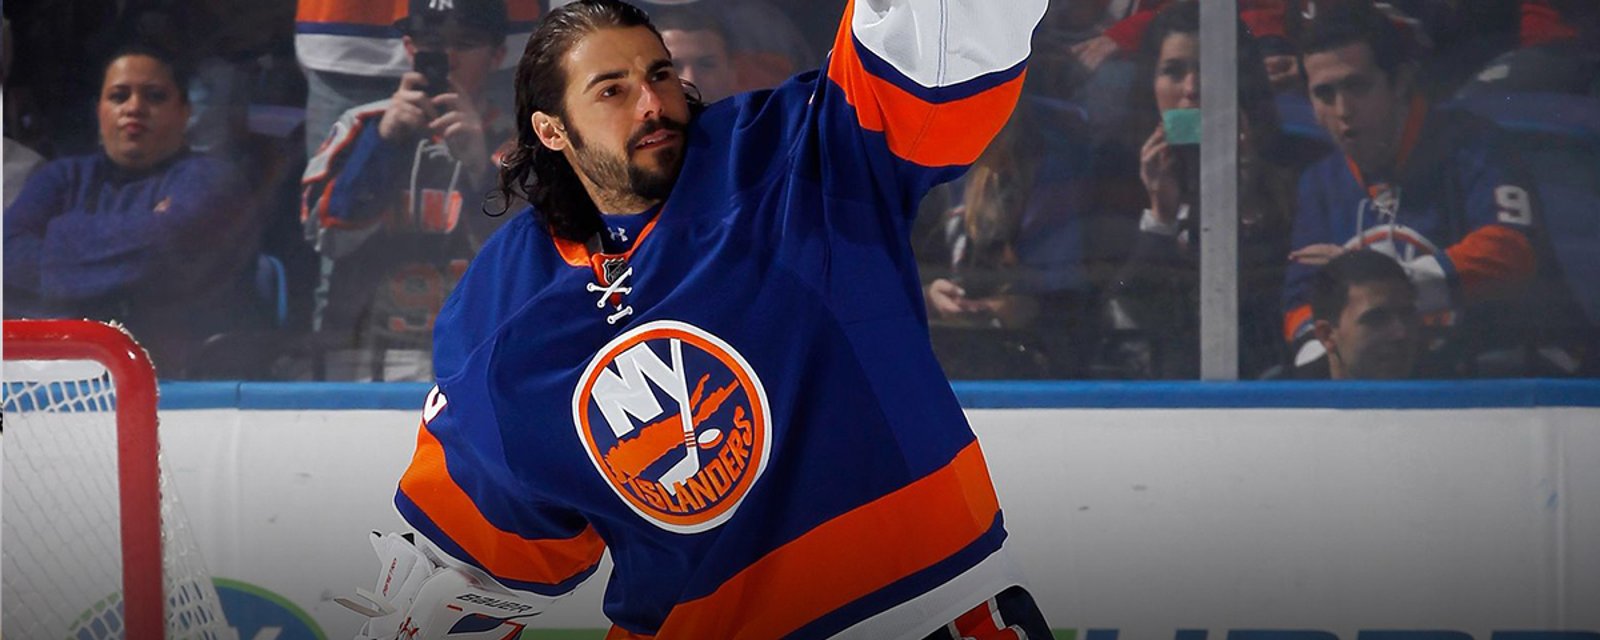 On this Day: Islanders sign DiPietro to historic 15-year deal worth $67.5 million